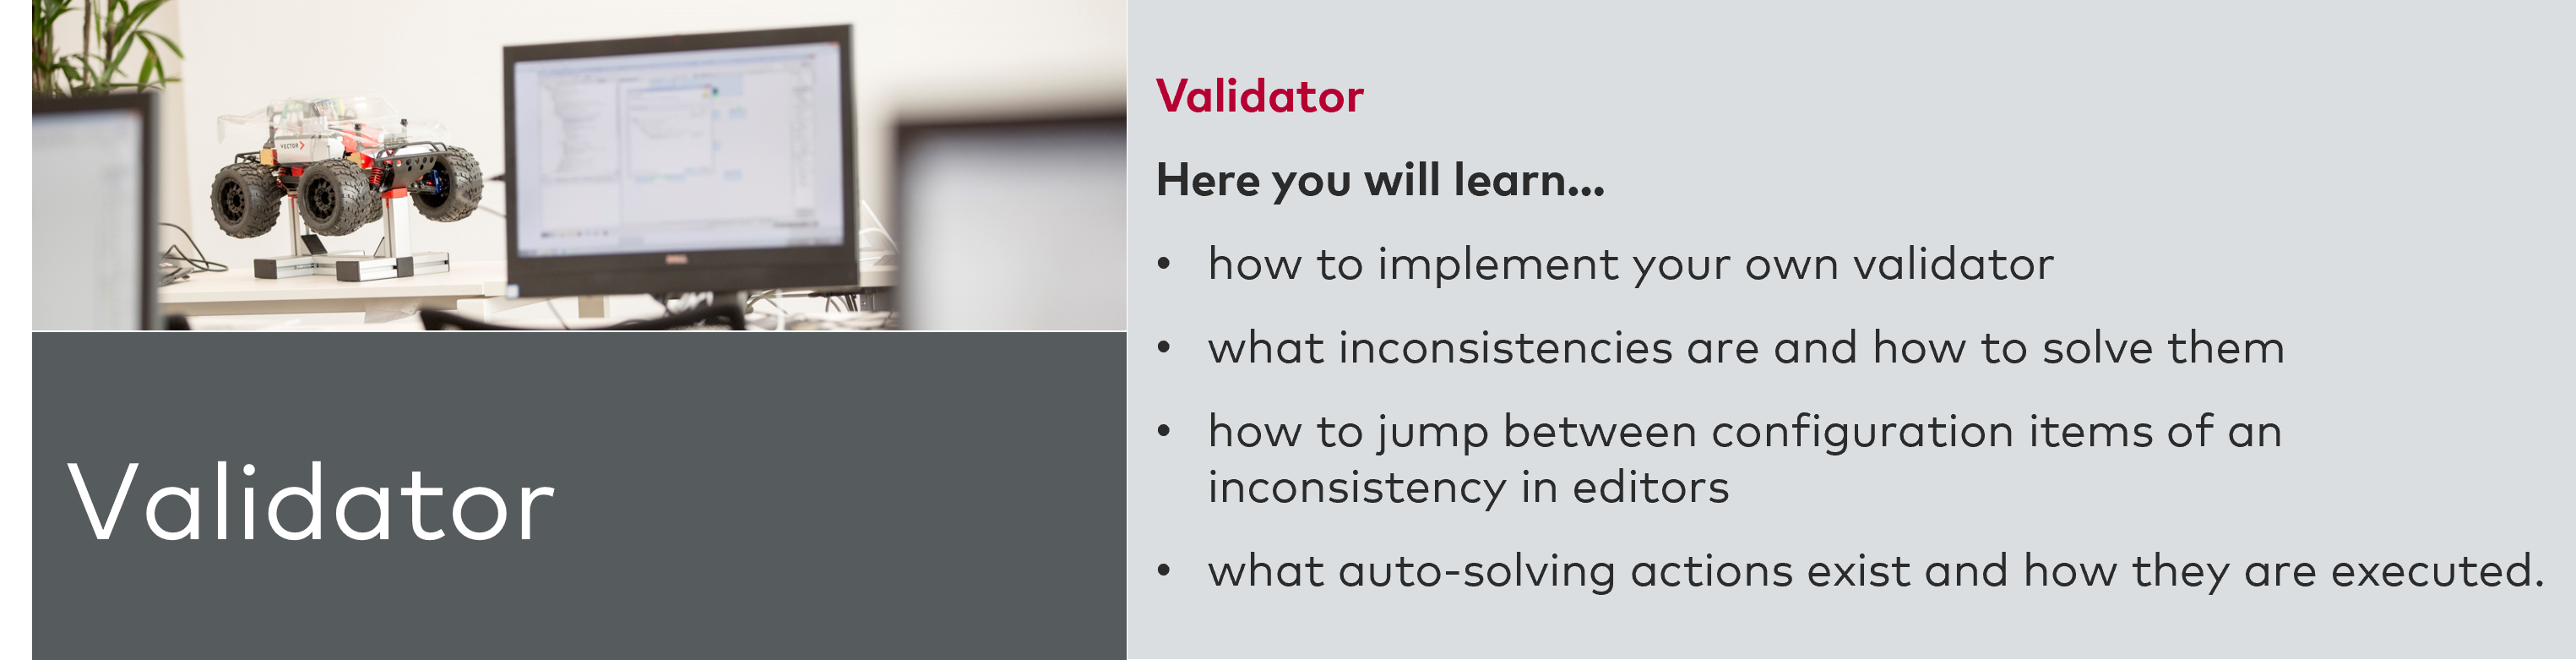 Learning goals and button to open module 3: Validator